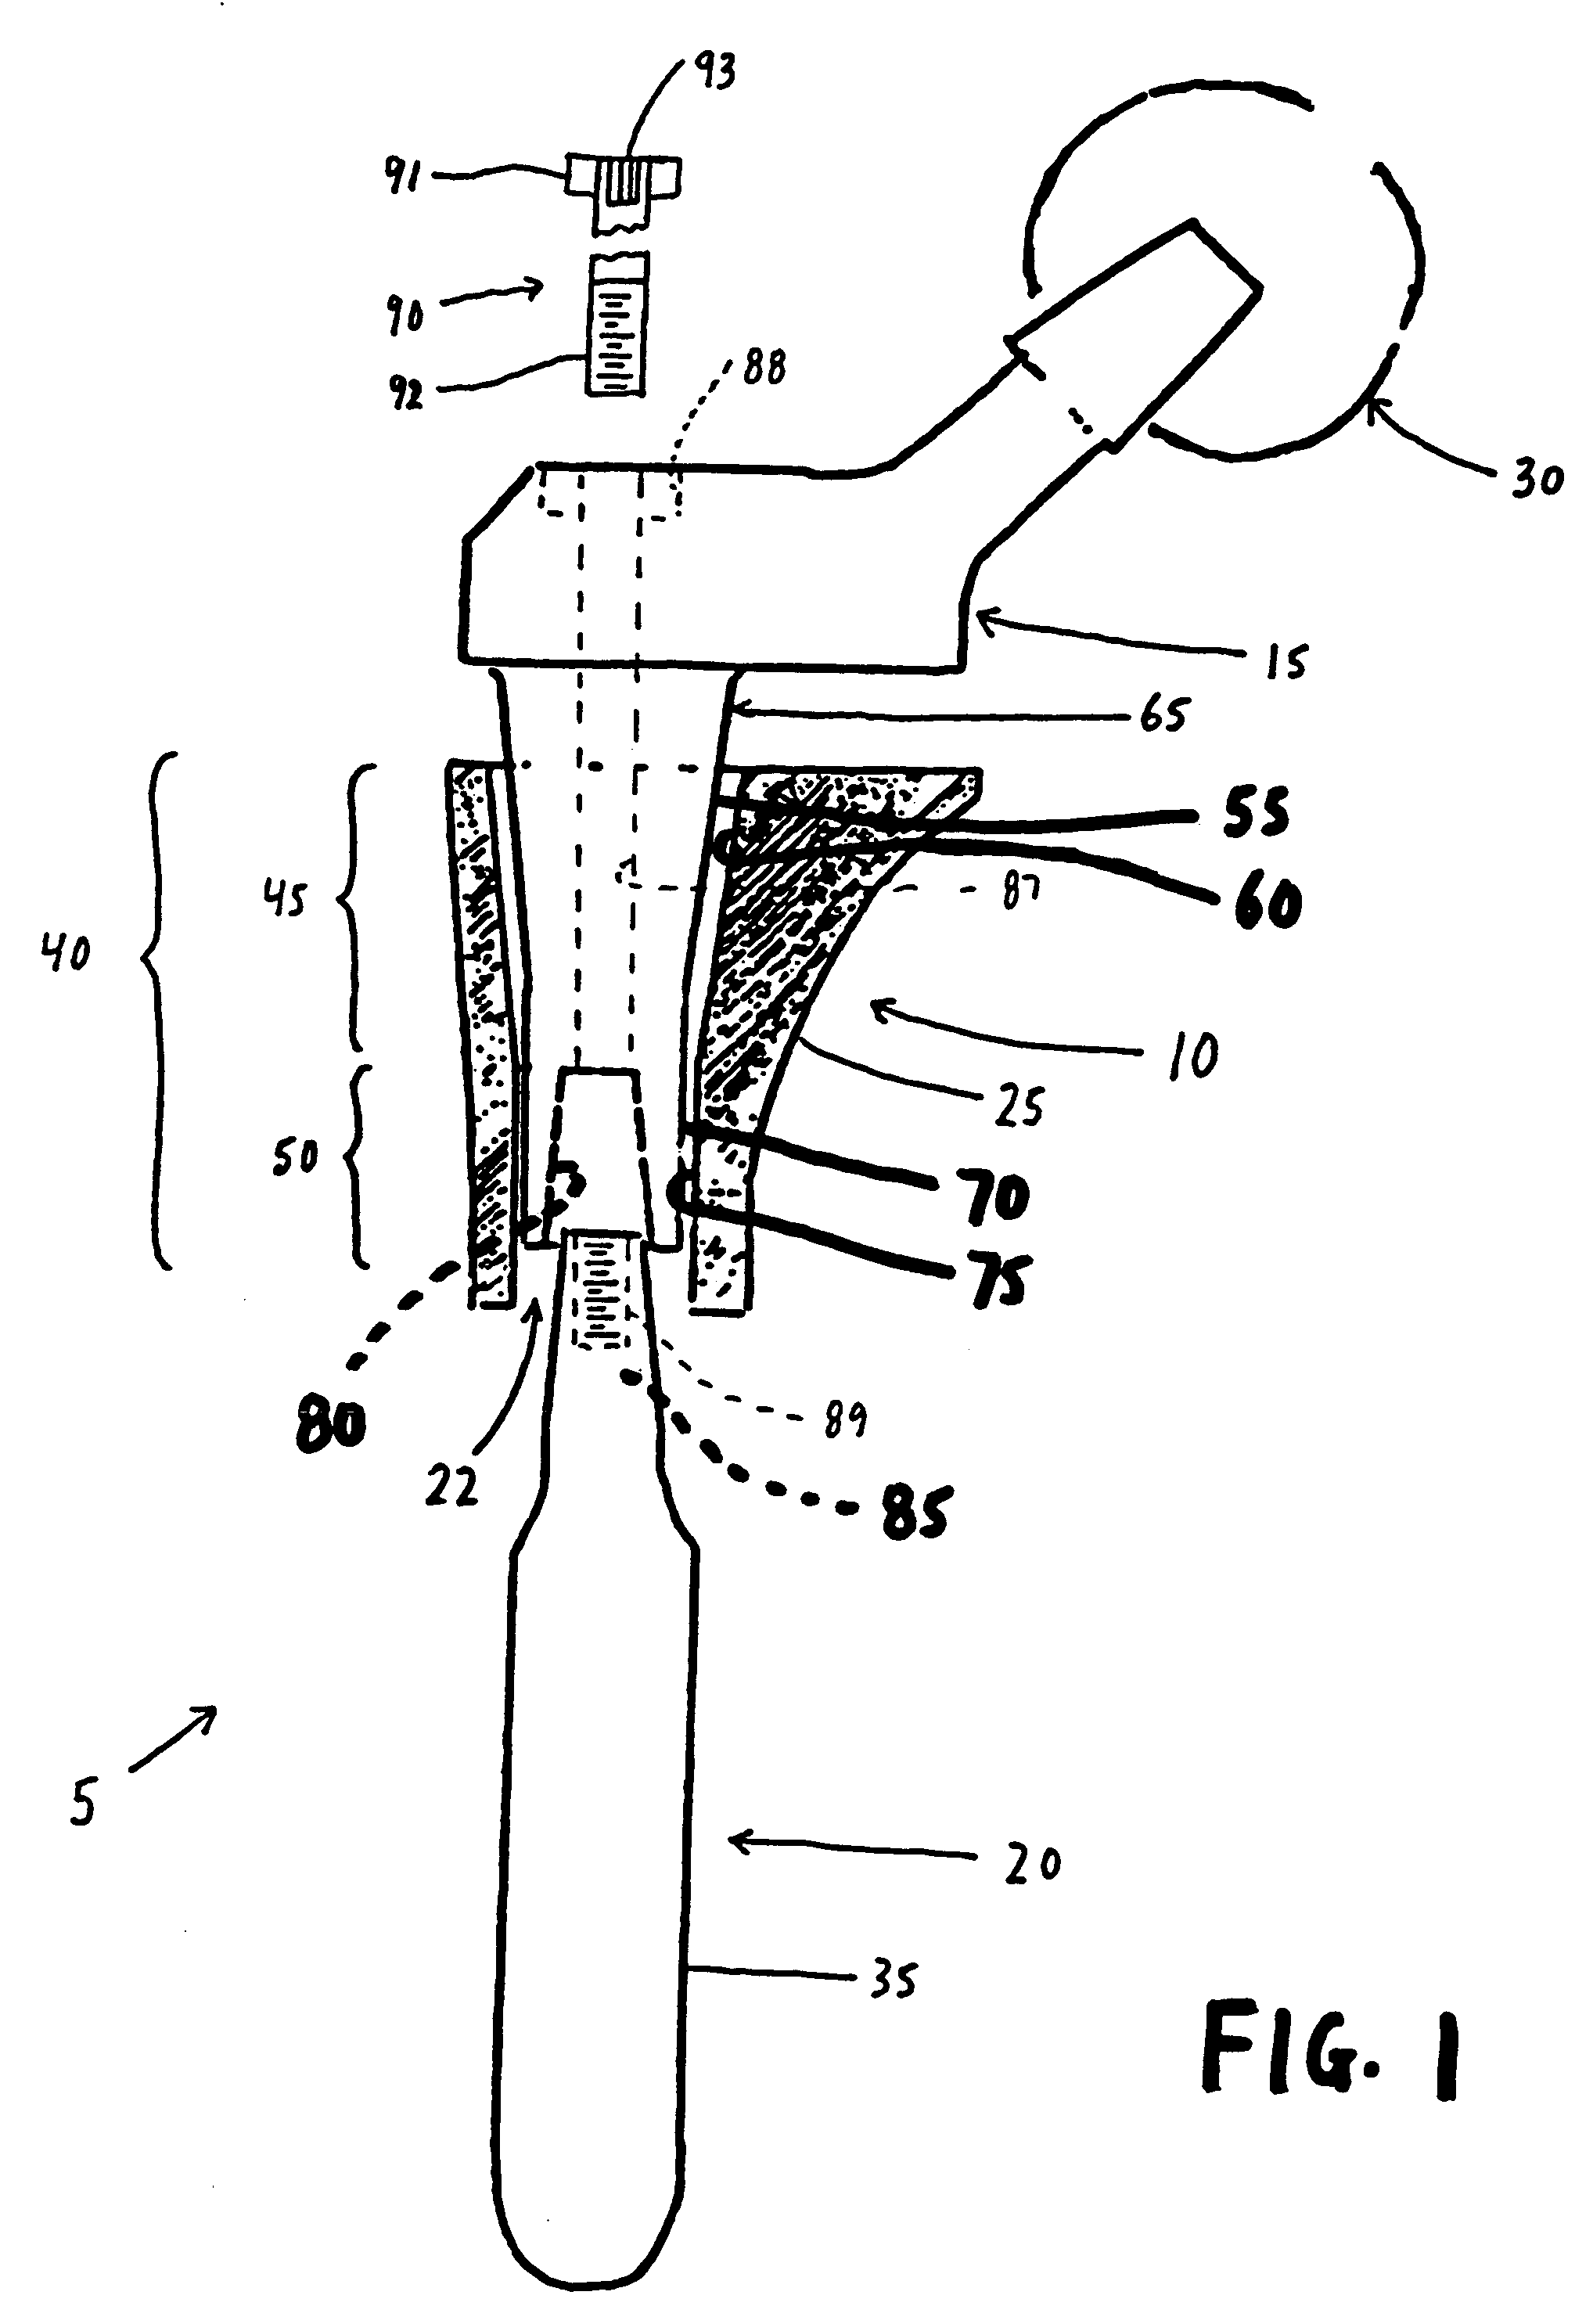 Modular femoral stem component for a hip joint prosthesis